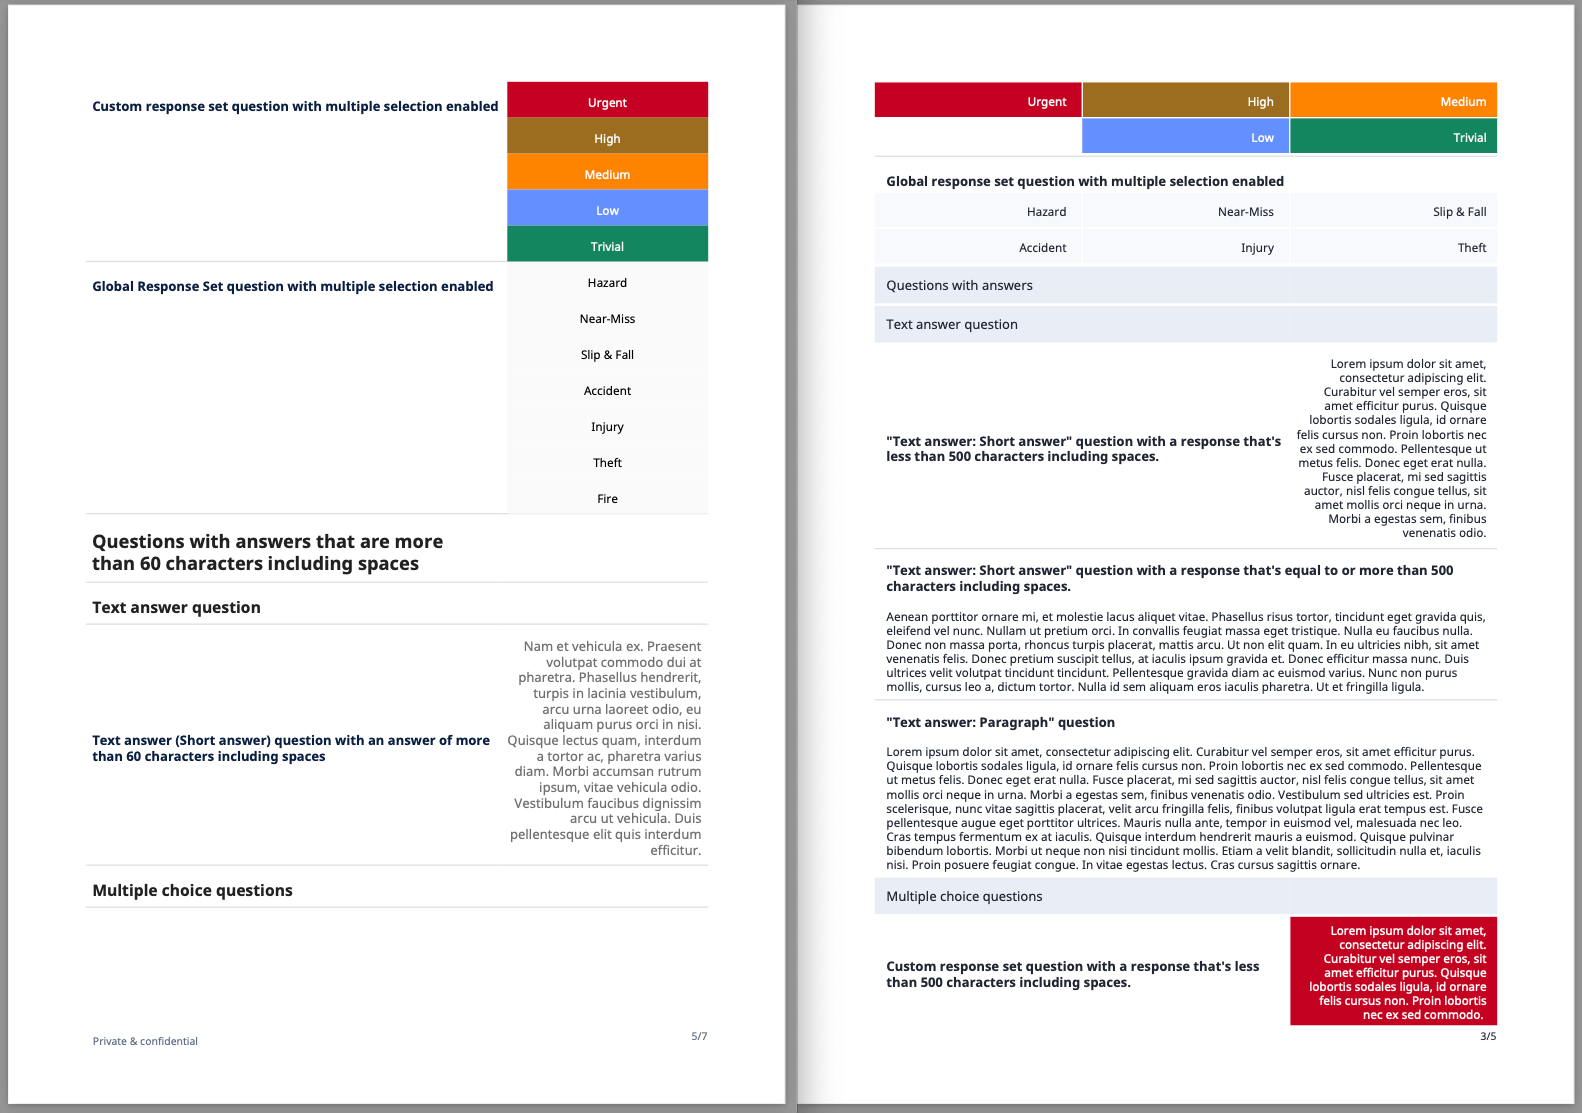 A screenshot showing a side-by-side comparison of existing and new inspection report visual changes.